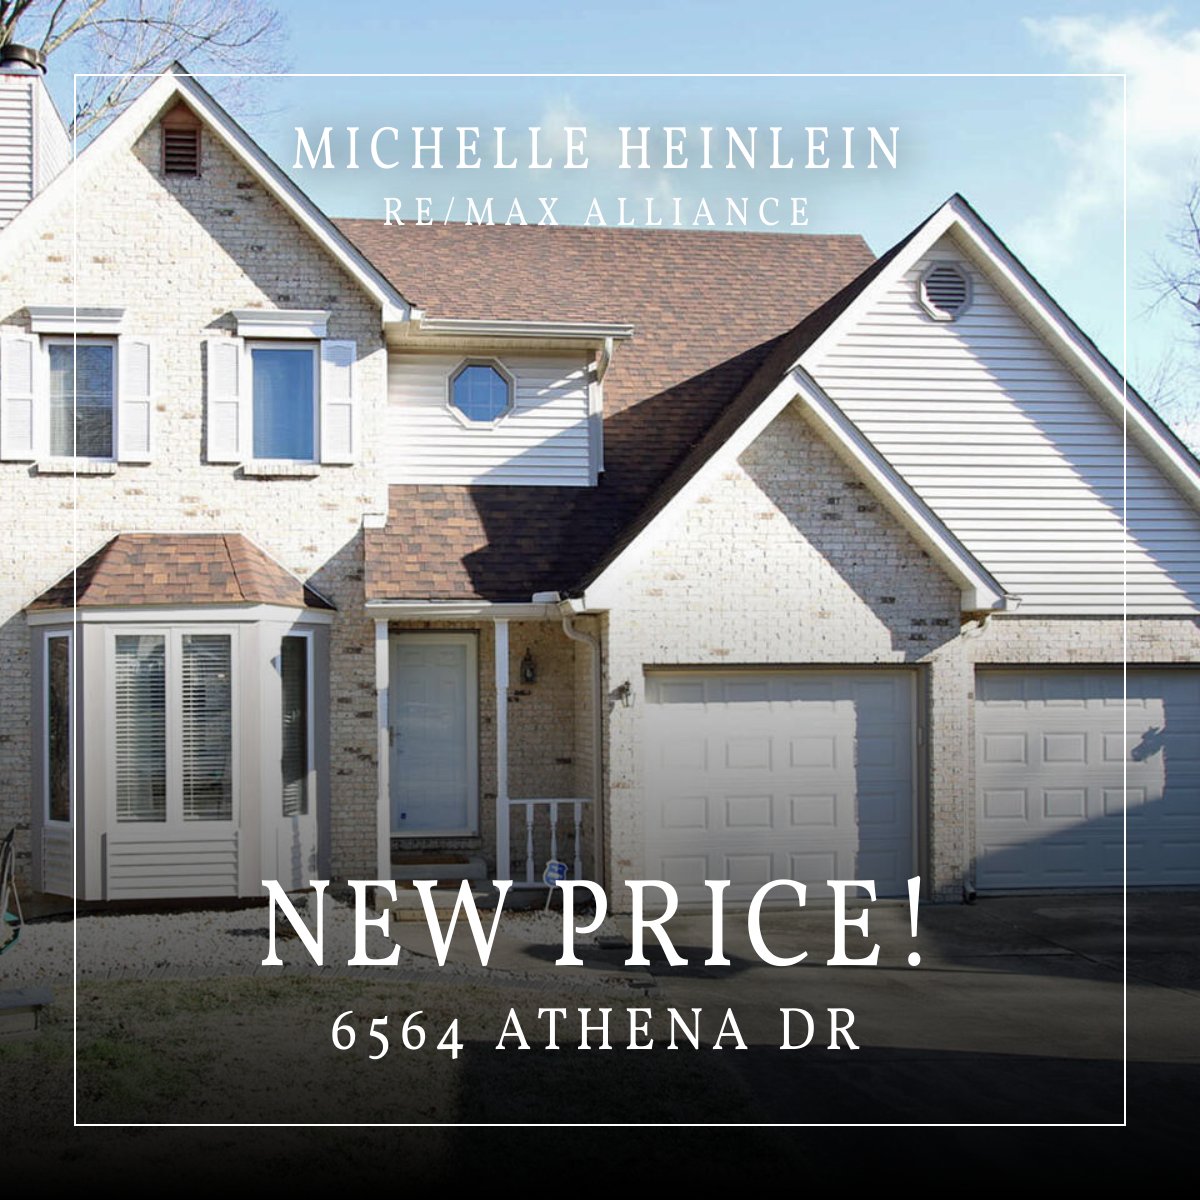 🏡New Price Alert! 🌟 6564 Athena Dr, Glen Carbon, IL 🌲🛏️ 3 Bedrooms | 🛁 3 Bathrooms | 🔥 2 Fireplaces | 🌳 Situated on 2 Lots 
rem.ax/3U9rBju
💬 DM for details or to schedule a visit! Your new home awaits.
#realtor #HeinleinHomeTeam #remax